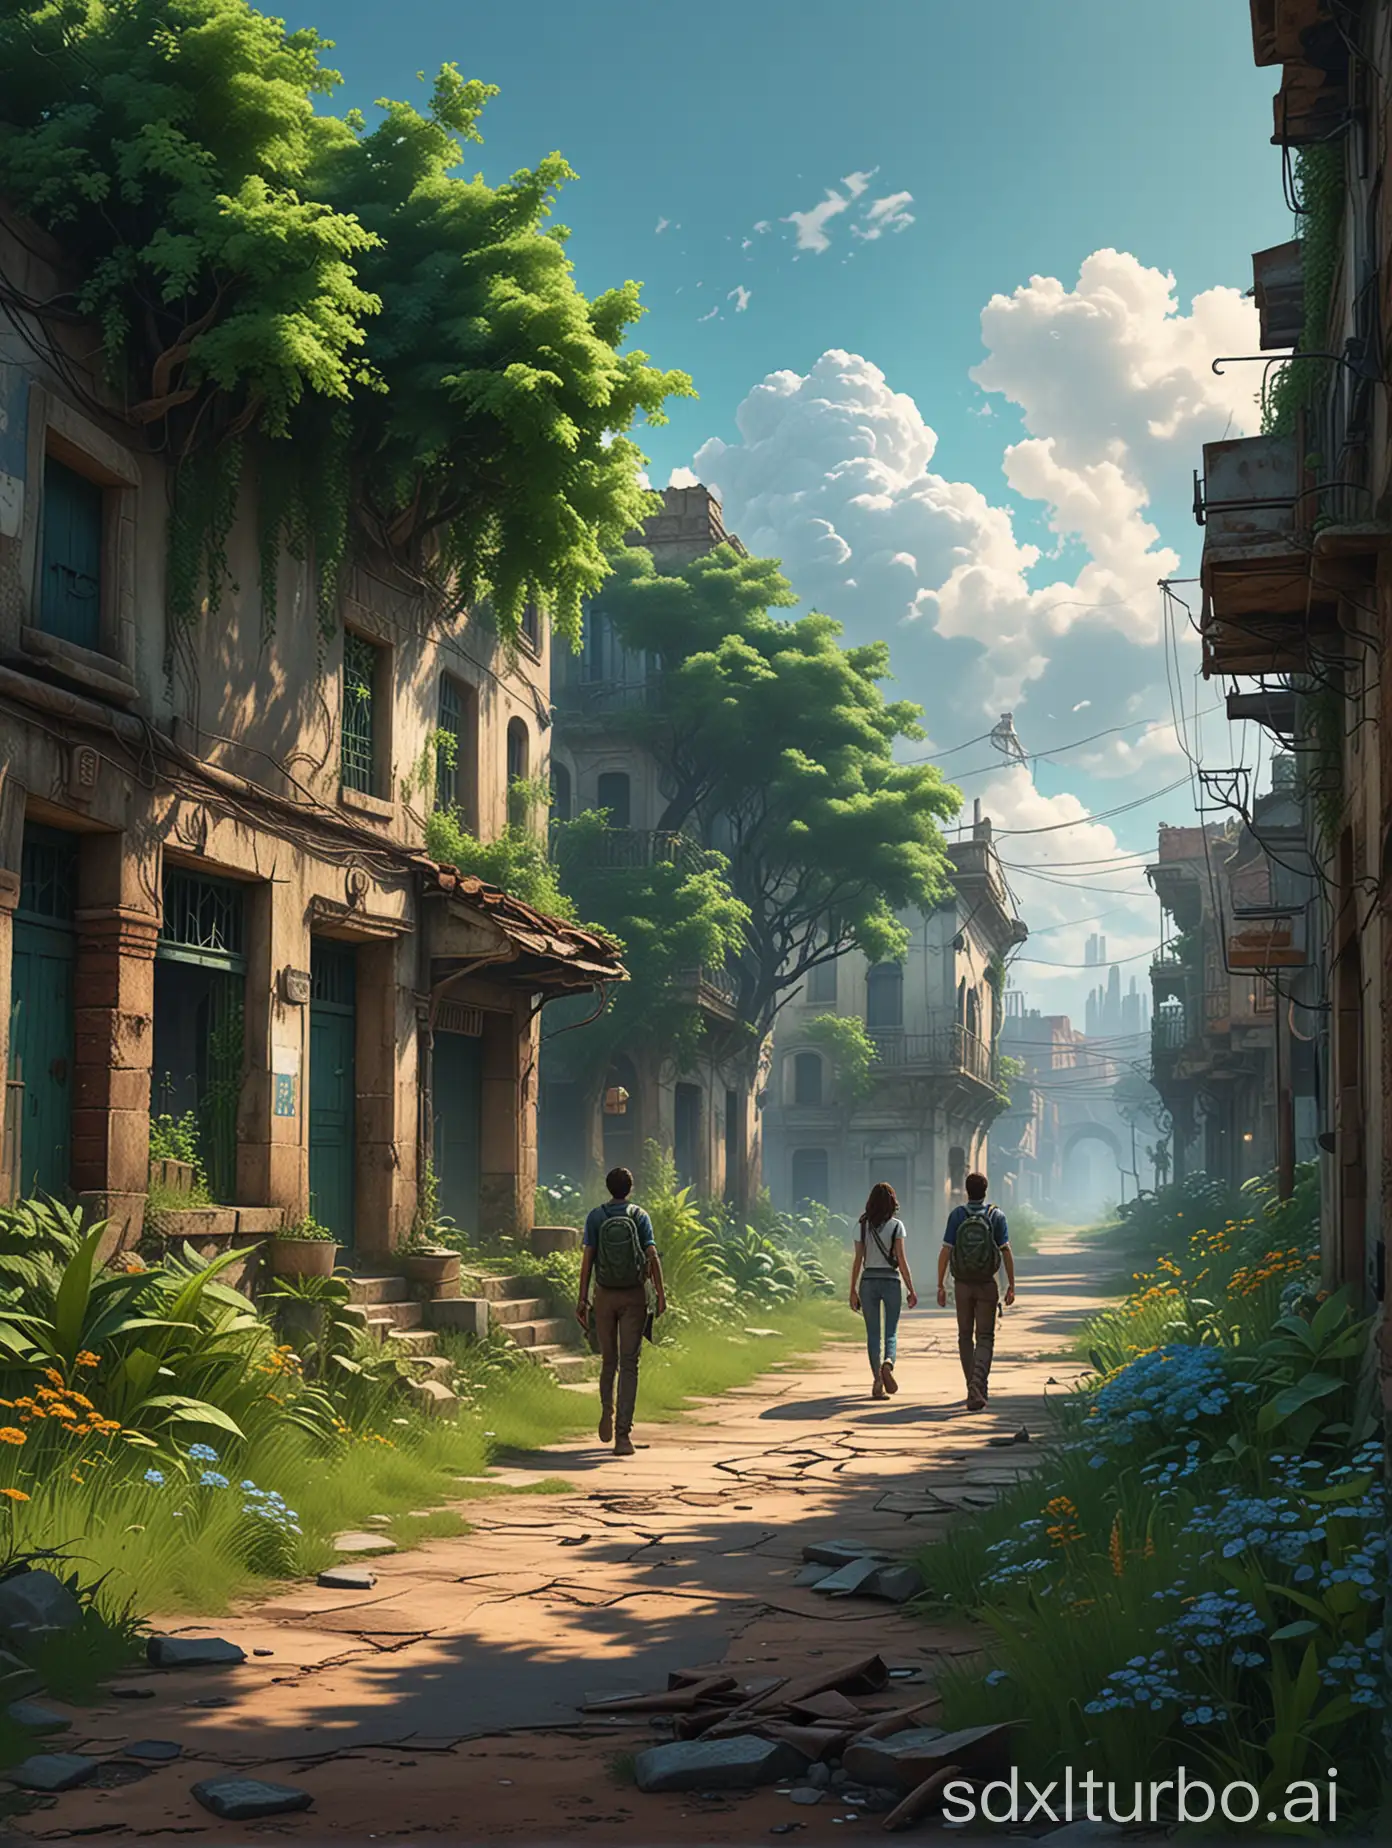 Uncharted game art style of an abandoned city, where lush greenery has taken over. A young man and a woman are leisurely strolling down the street, with their backs to the viewer. The predominant colors of green and blue are evident, as the trees,different kinds color of flowers and grass have reclaimed the city's structures. The sky is a brilliant blue, dotted with fluffy white clouds. This dystopian-meets-nature scene has an eerie yet serene atmosphere, showcasing the resilience of nature in an urban environment.viiviid